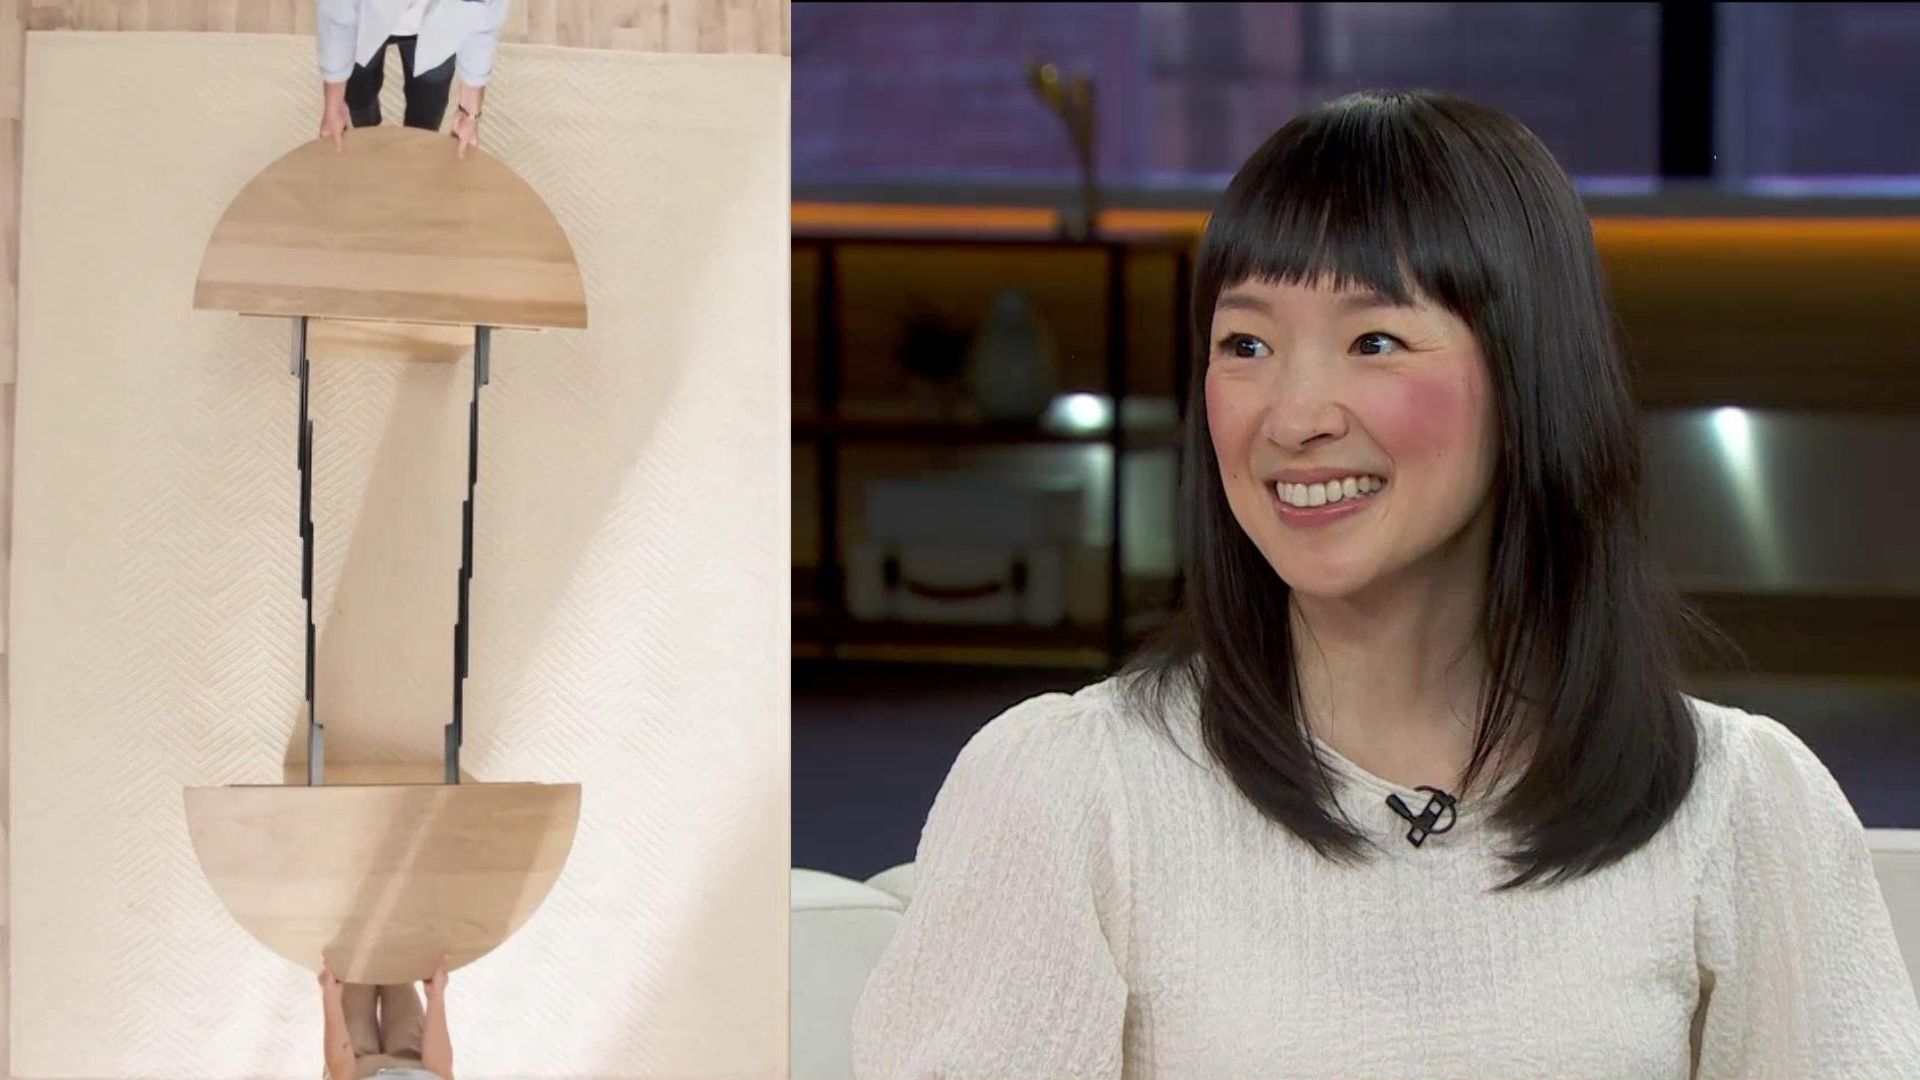 THE Marie Kondo joins us in studio to talk about her latest organizing venture